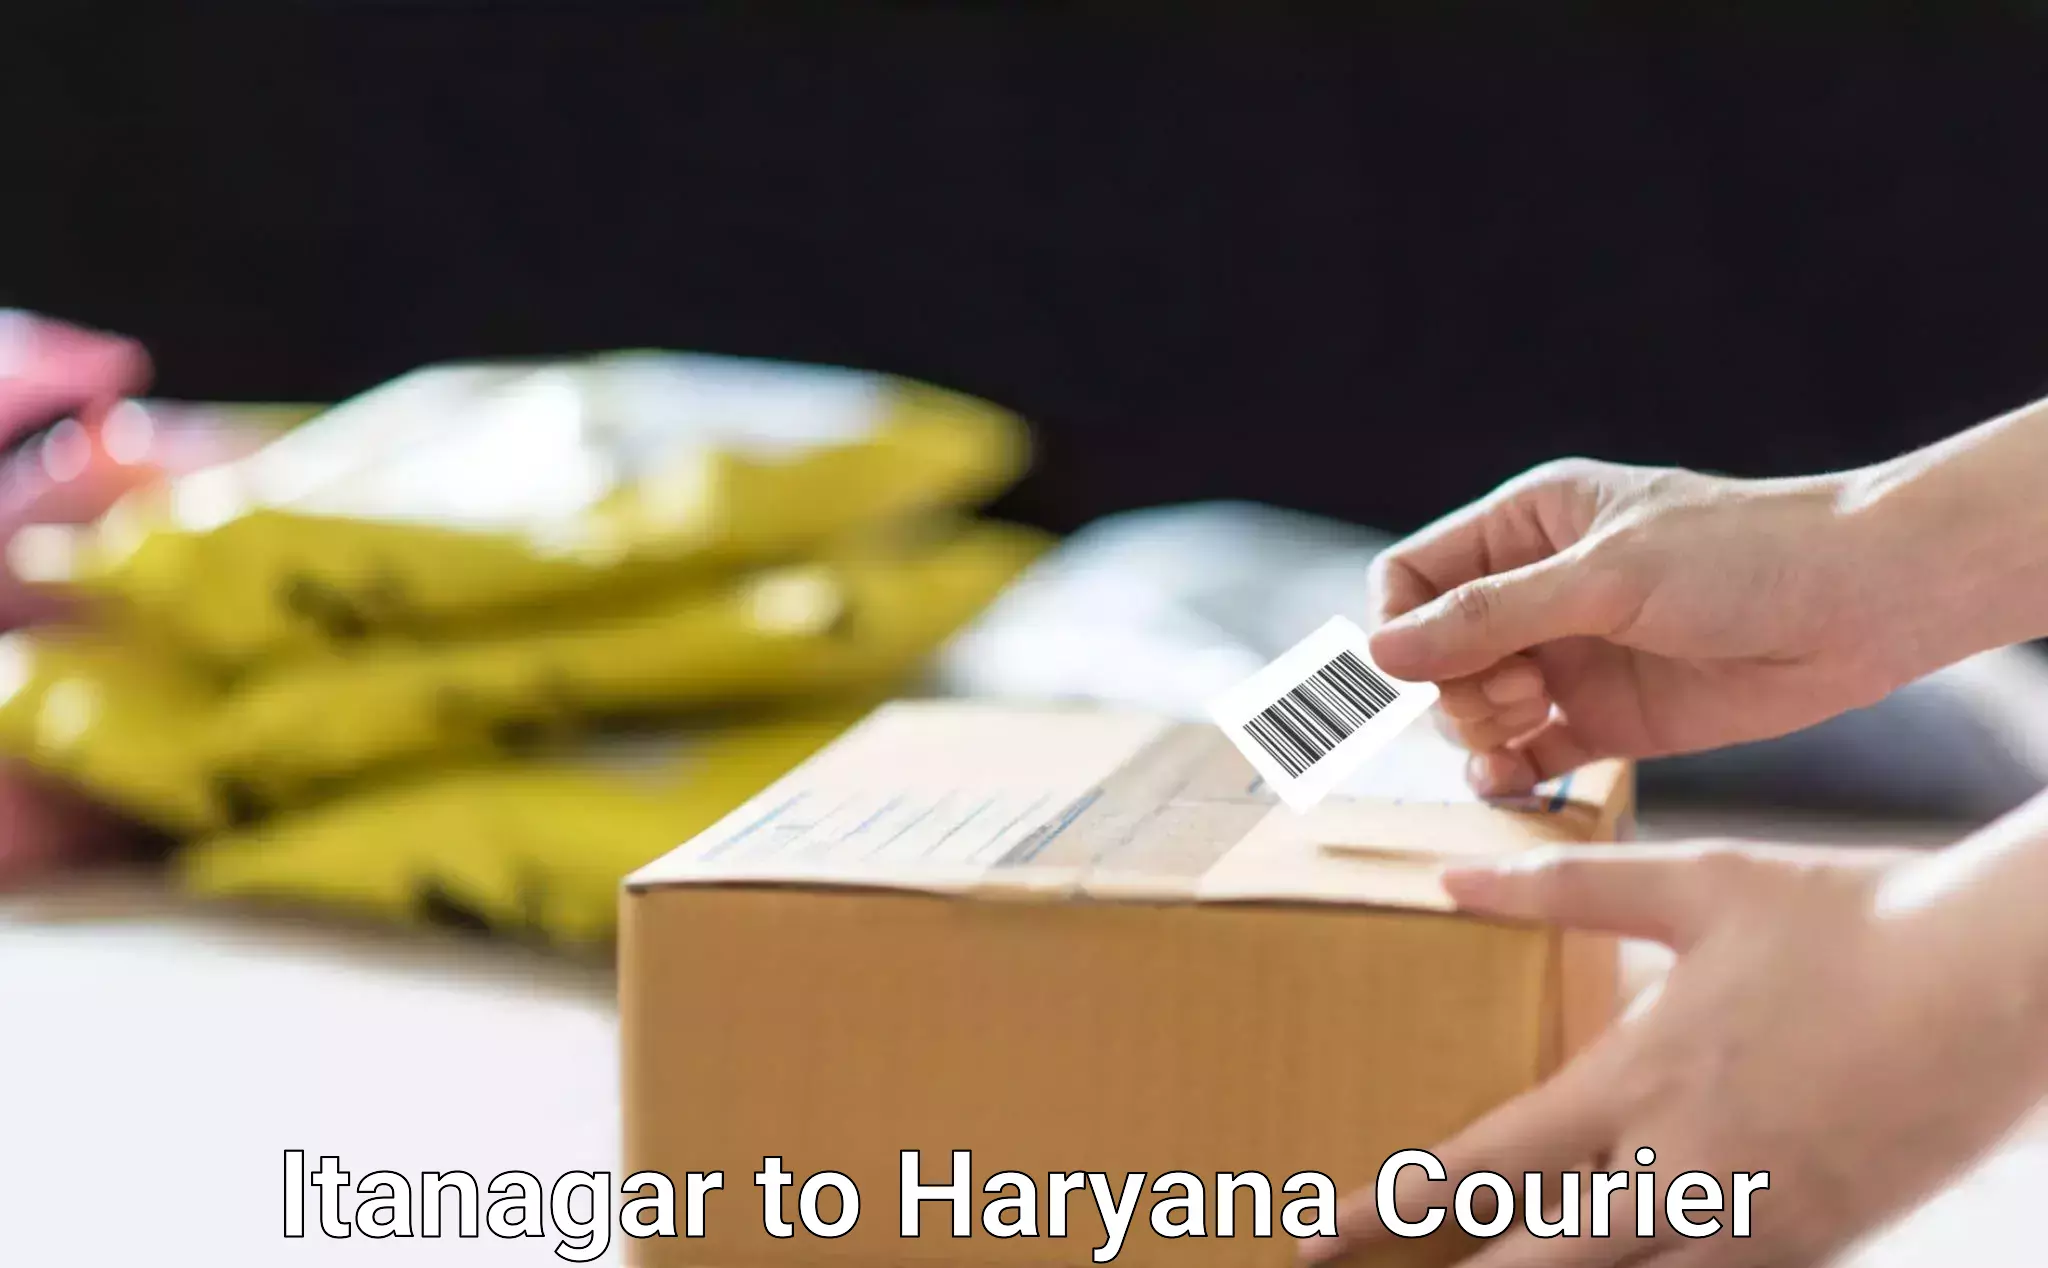 State-of-the-art courier technology Itanagar to Sirsa